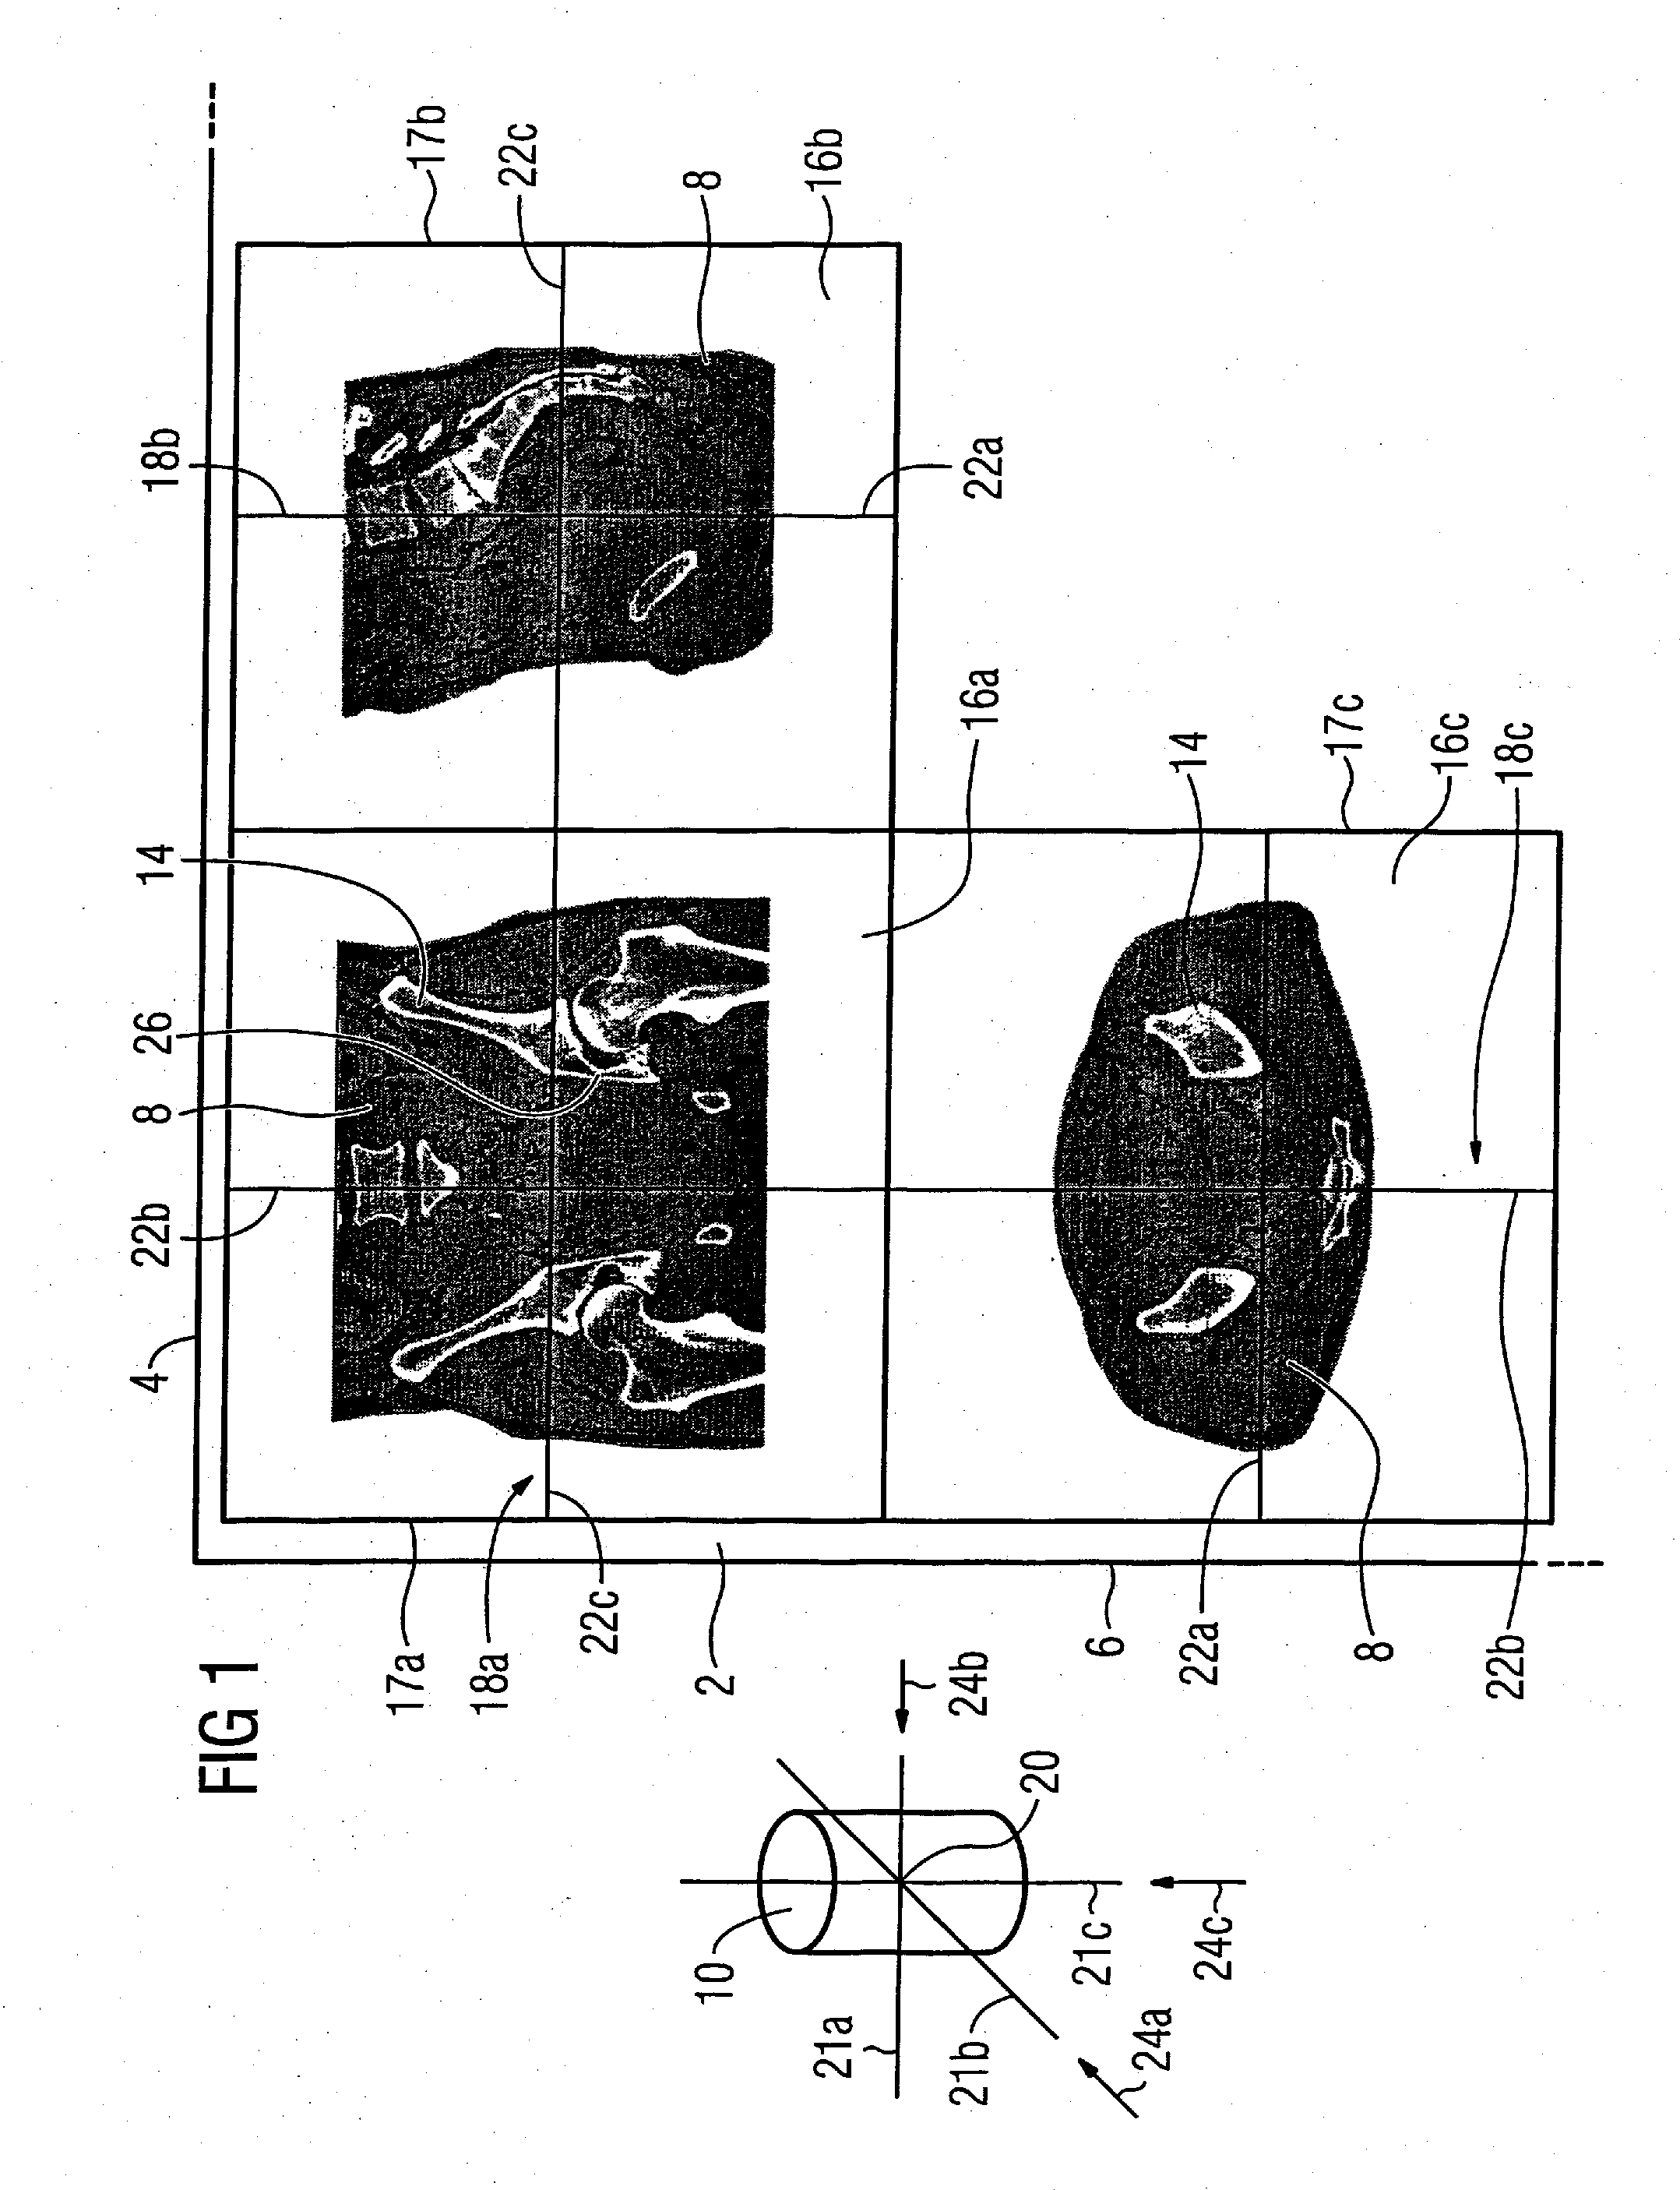 Method for display of medical 3D image data on a monitor